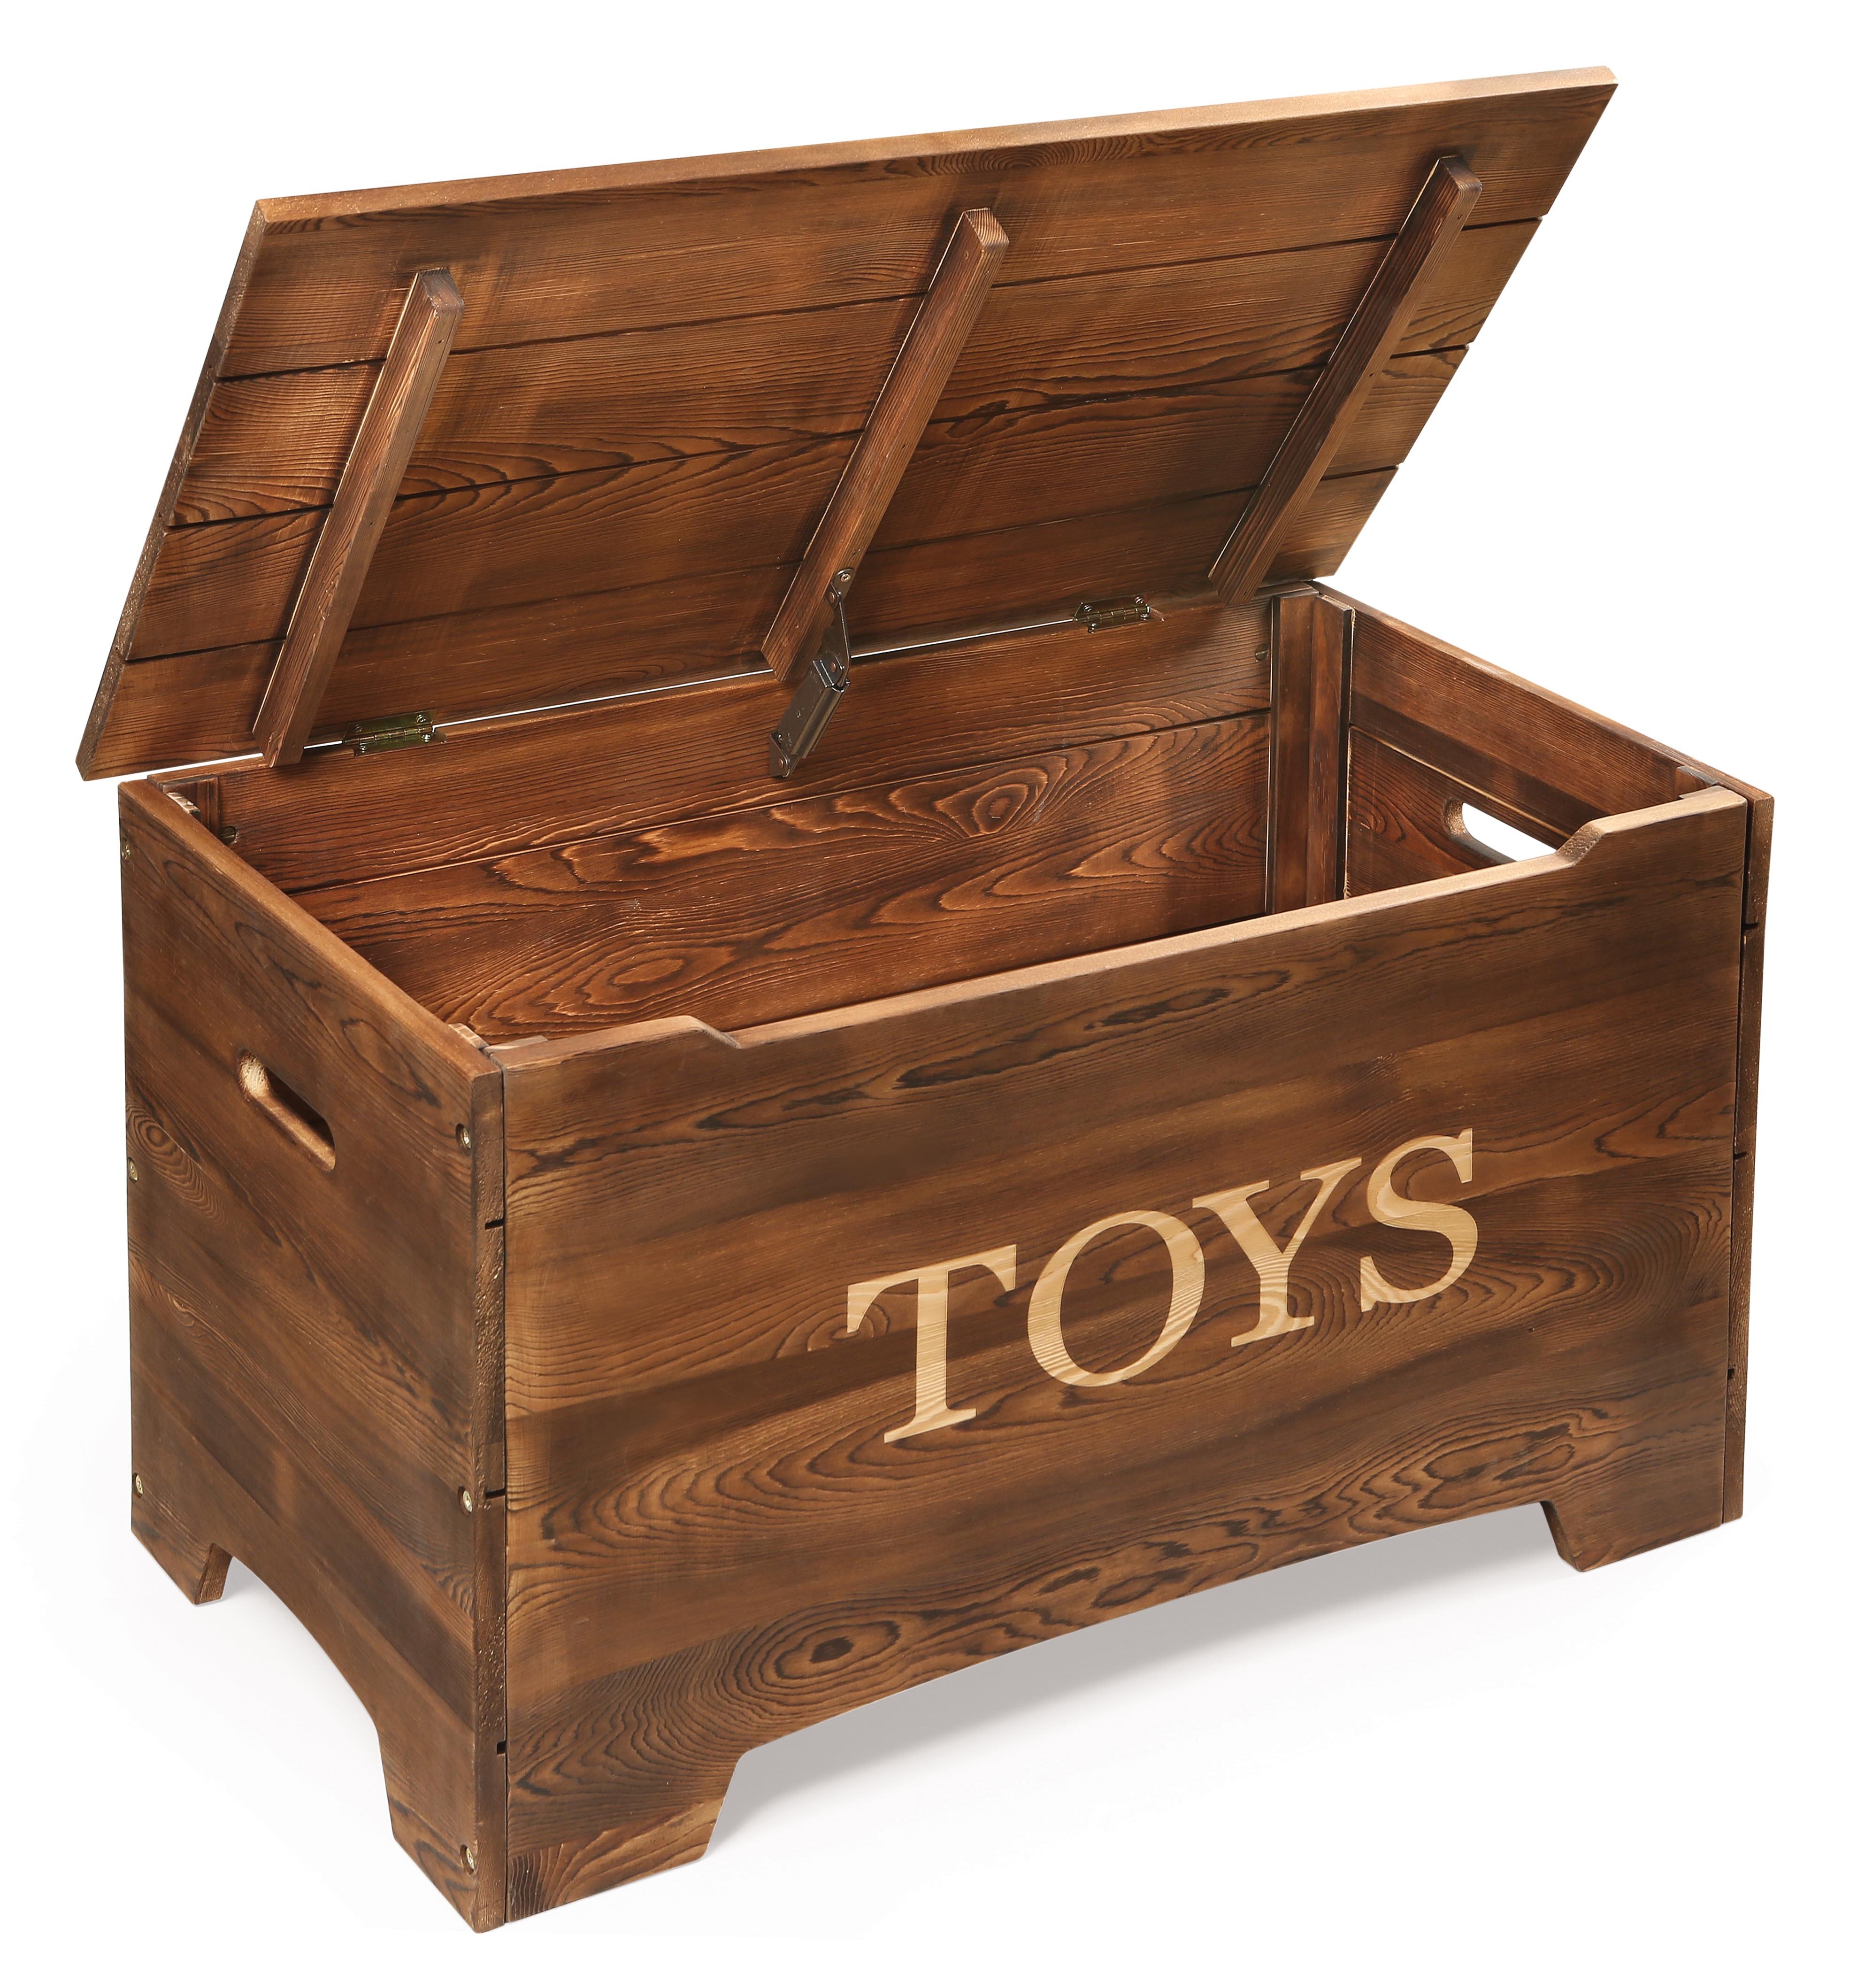 solid wood toy box